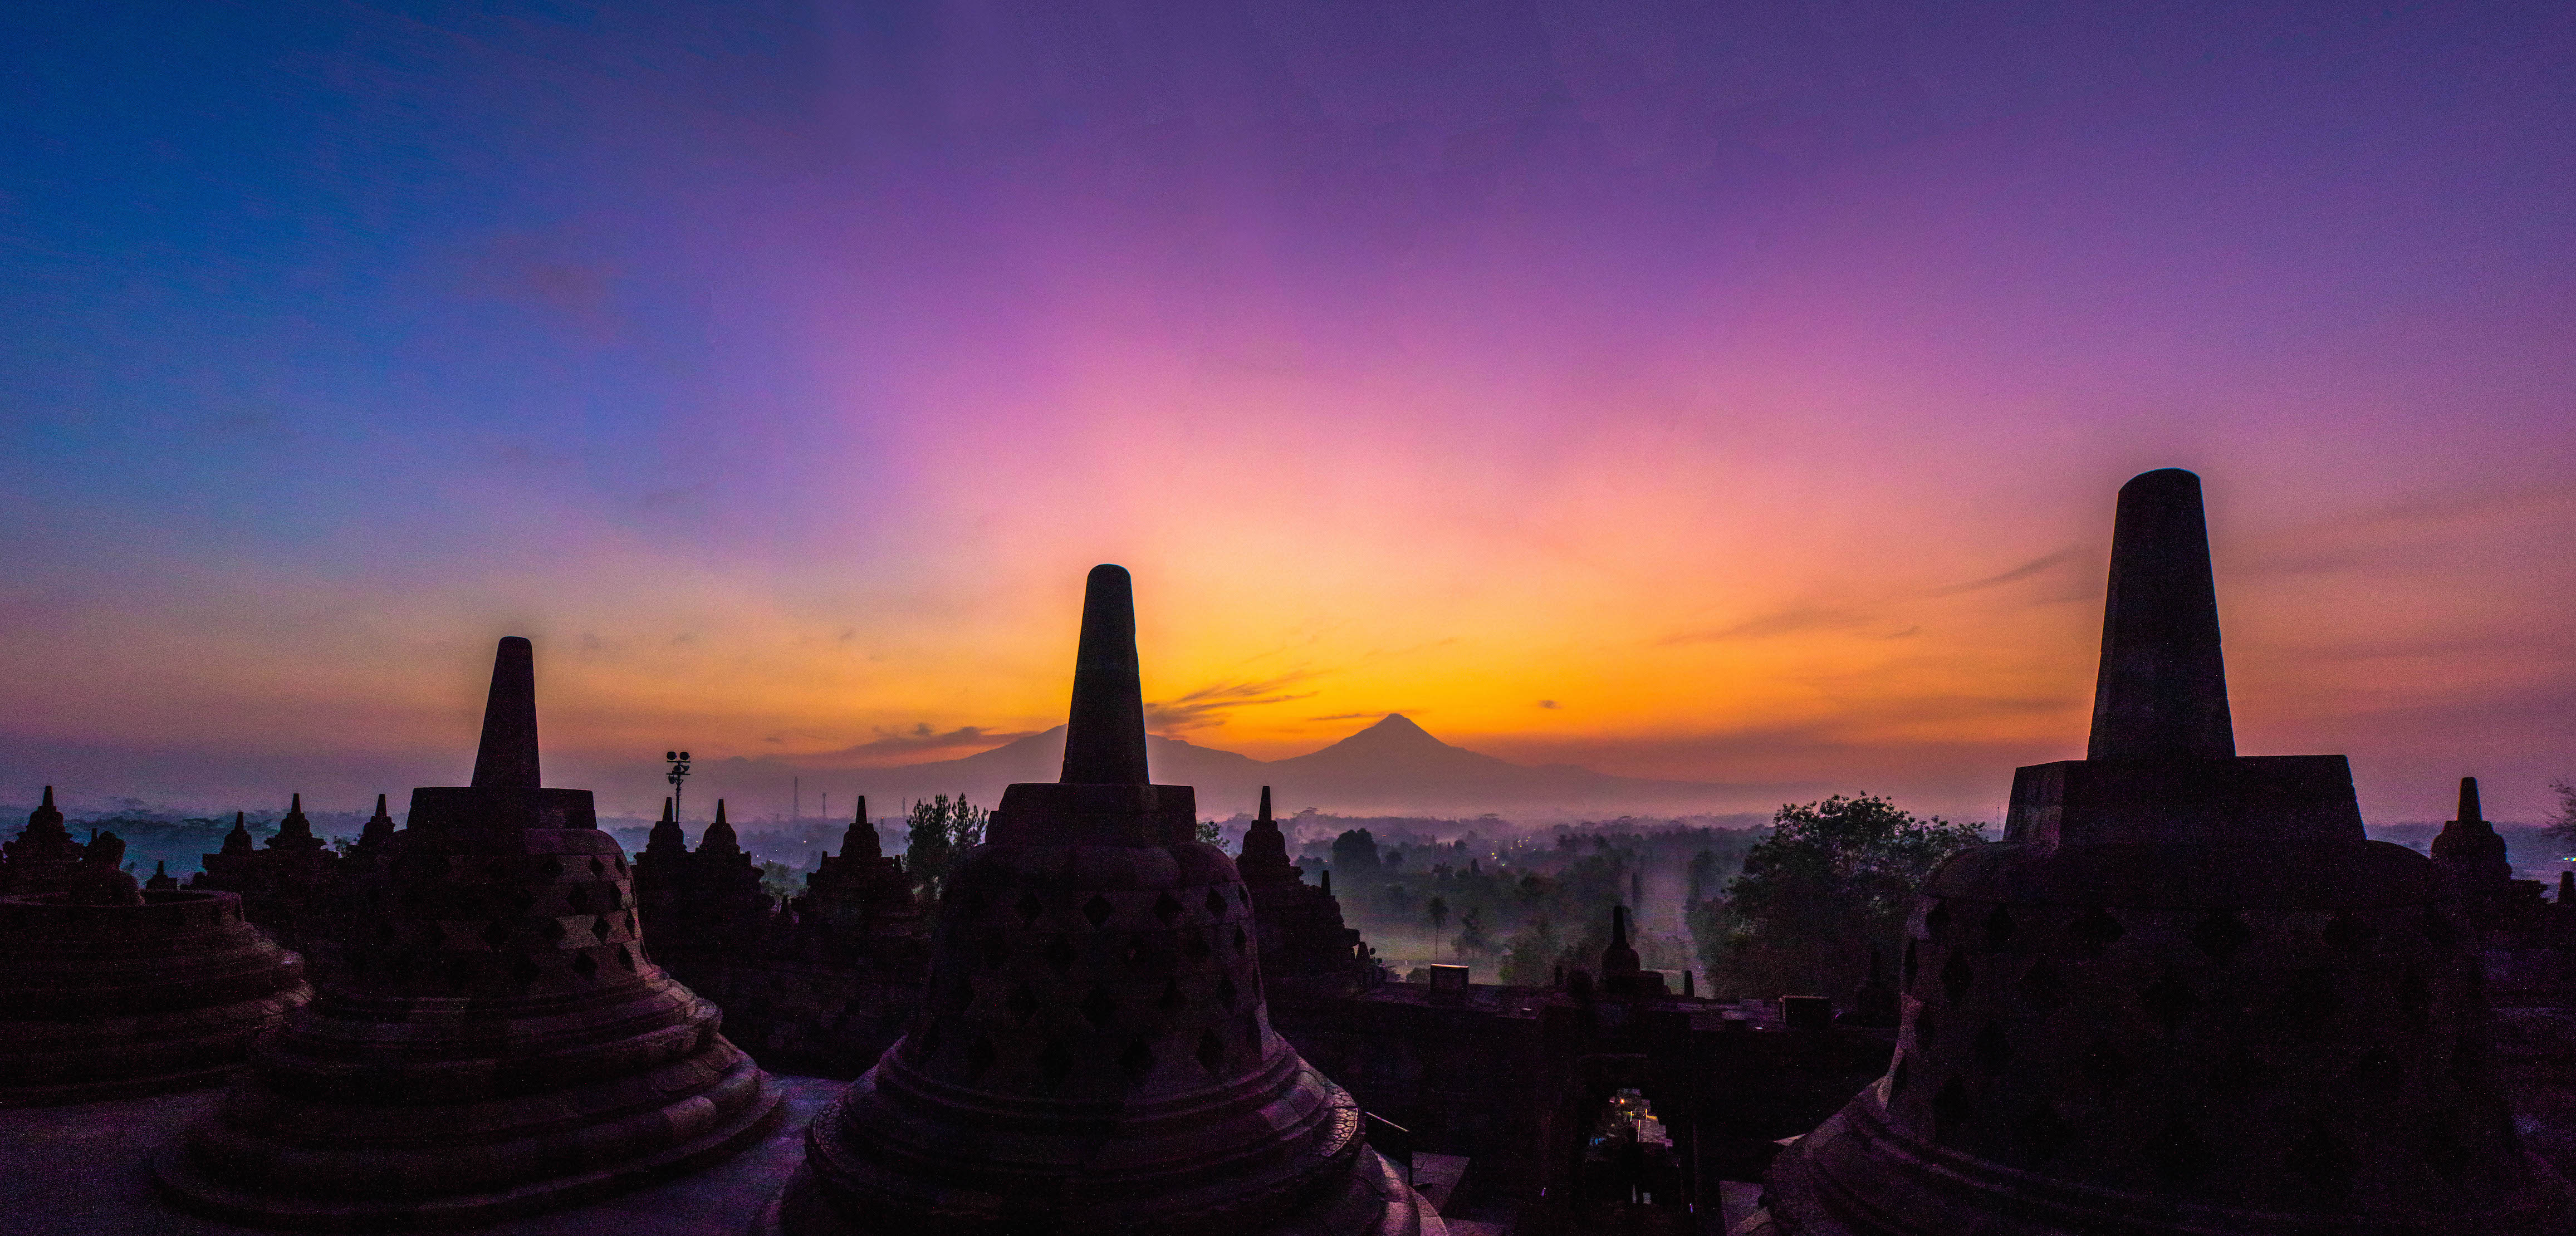 Sunrise view from the top level of Borobudur, Indonesia